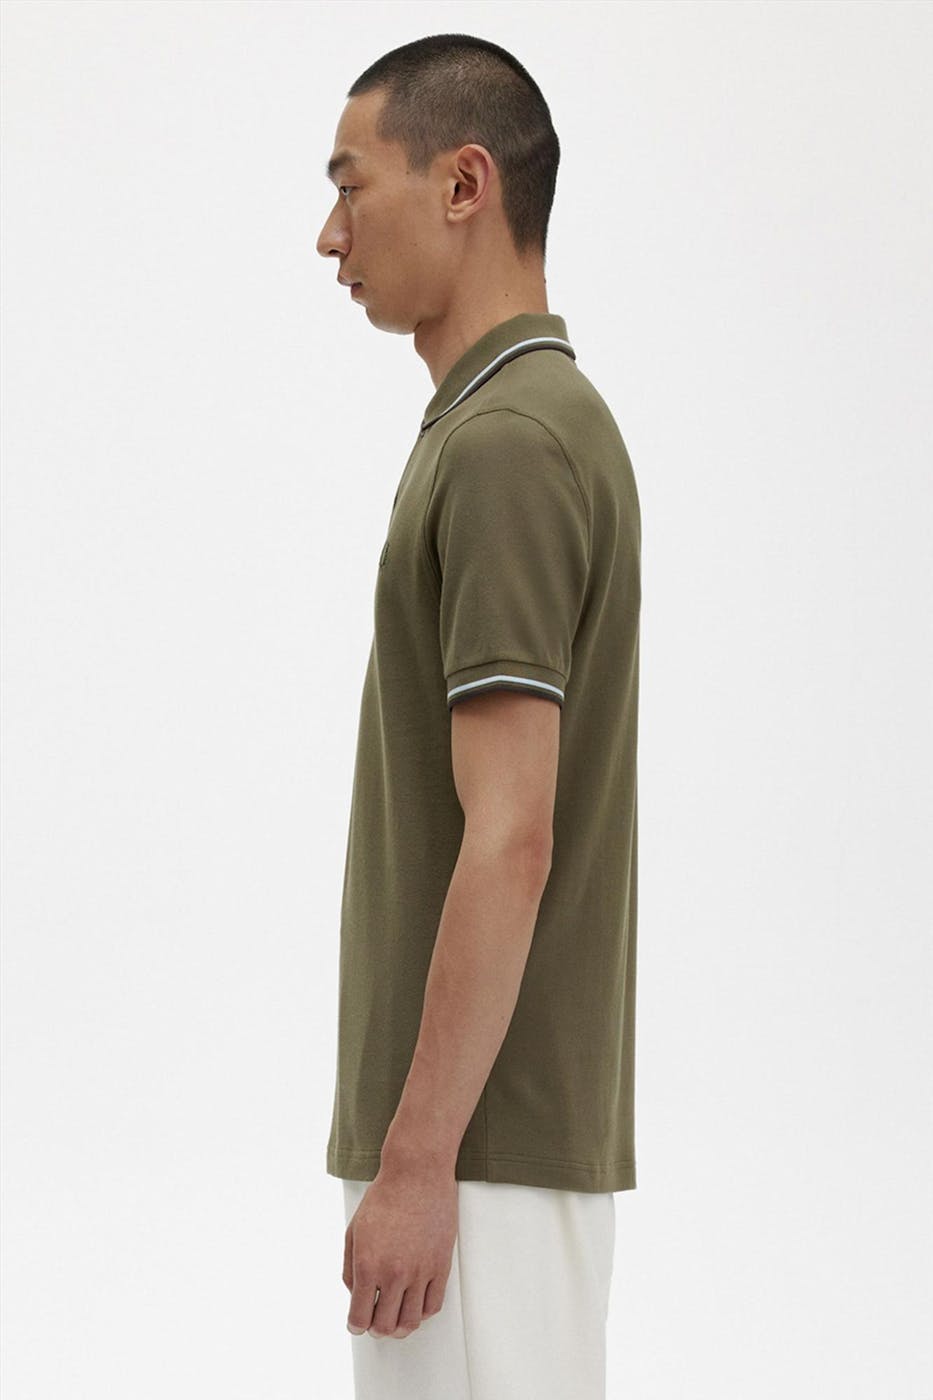 Fred Perry - Olijfgroene Twin Tipped polo